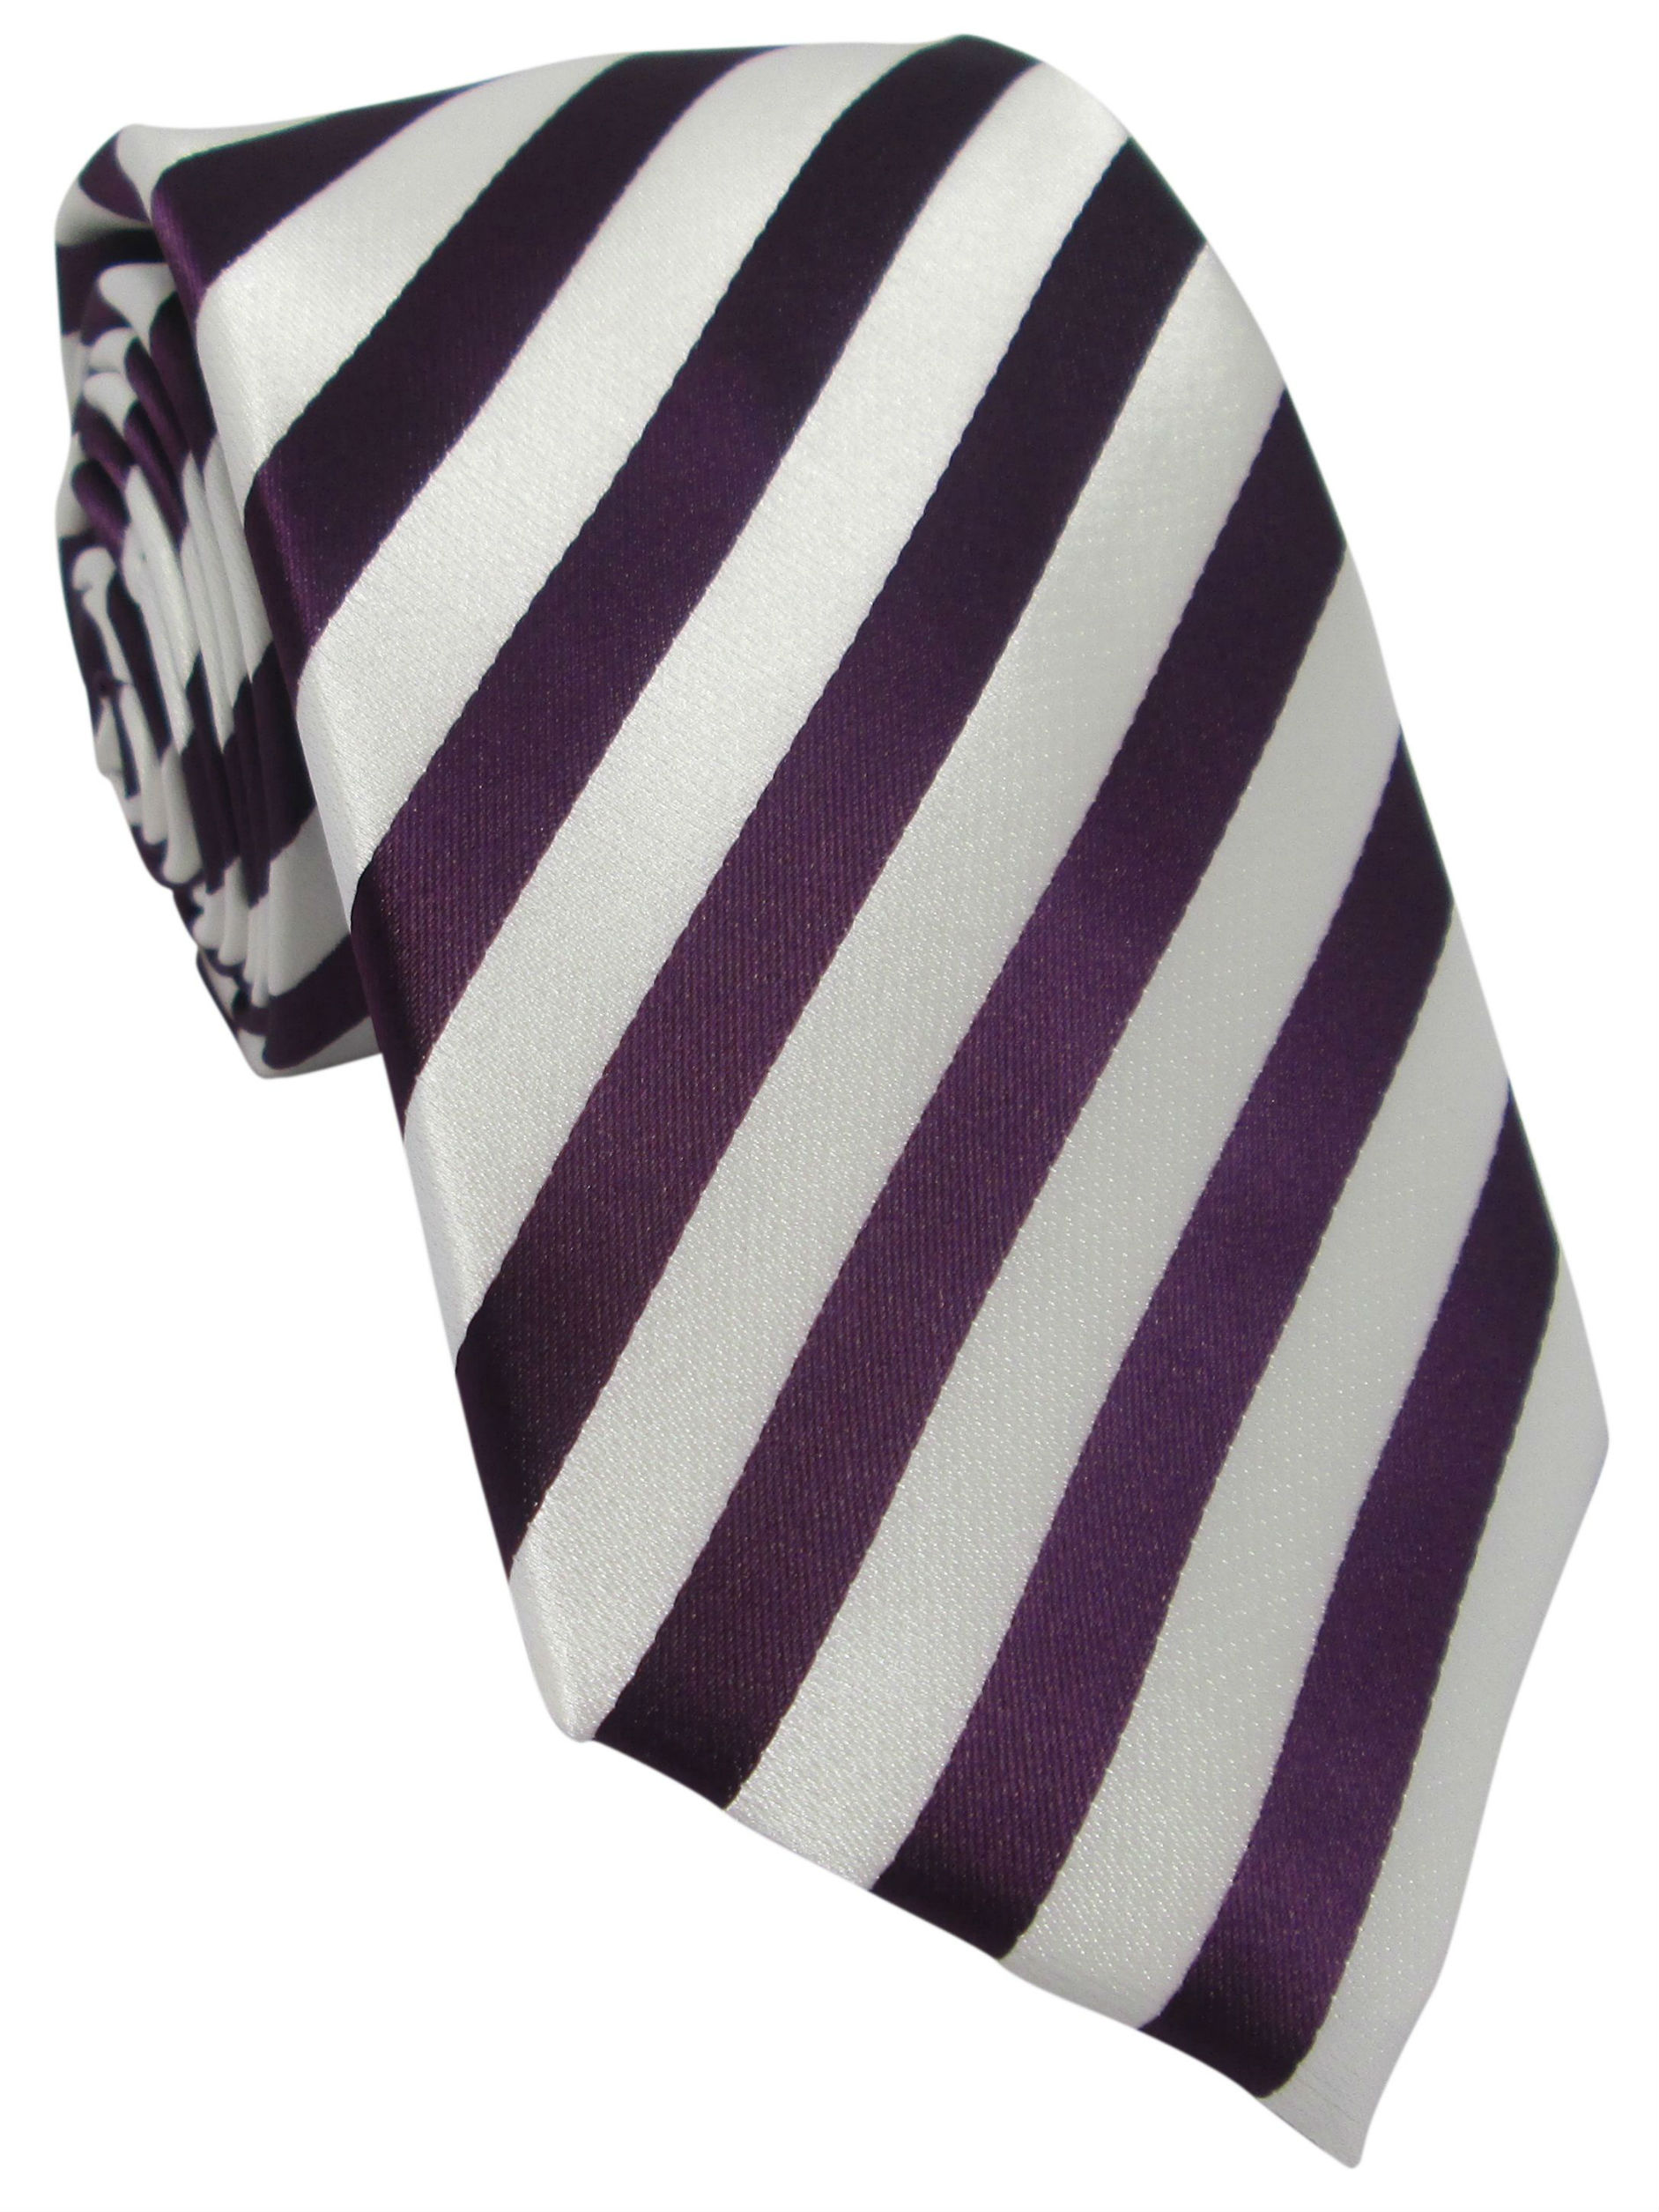 Deep Purple and White Striped Tie